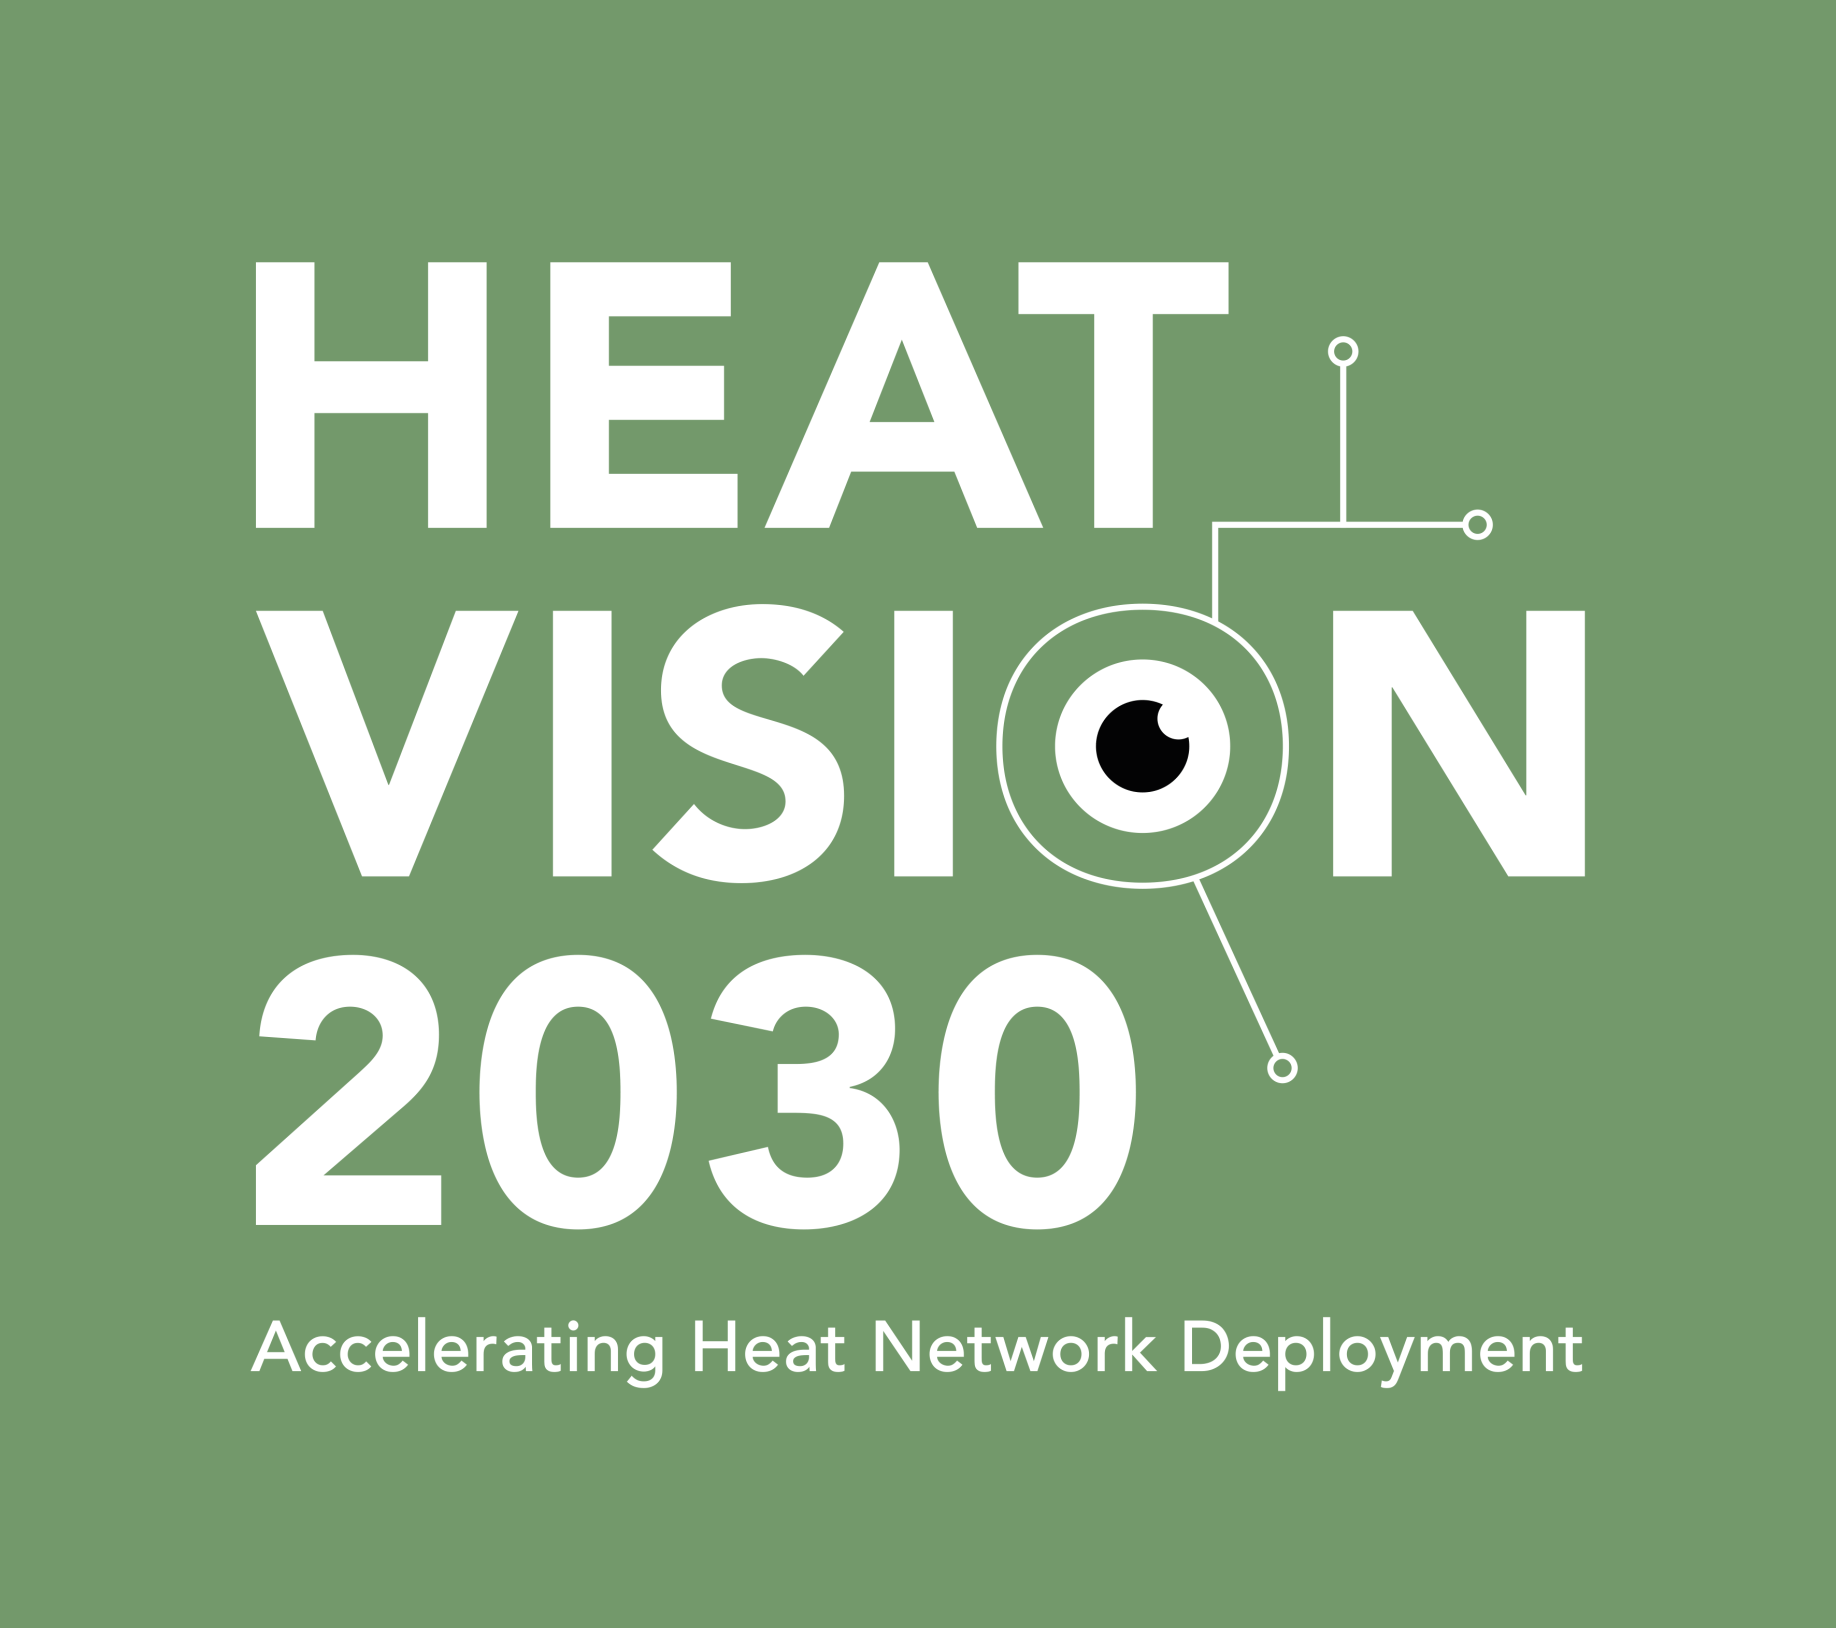 Heat Vision 2030 - How to deploy a city centre heat network